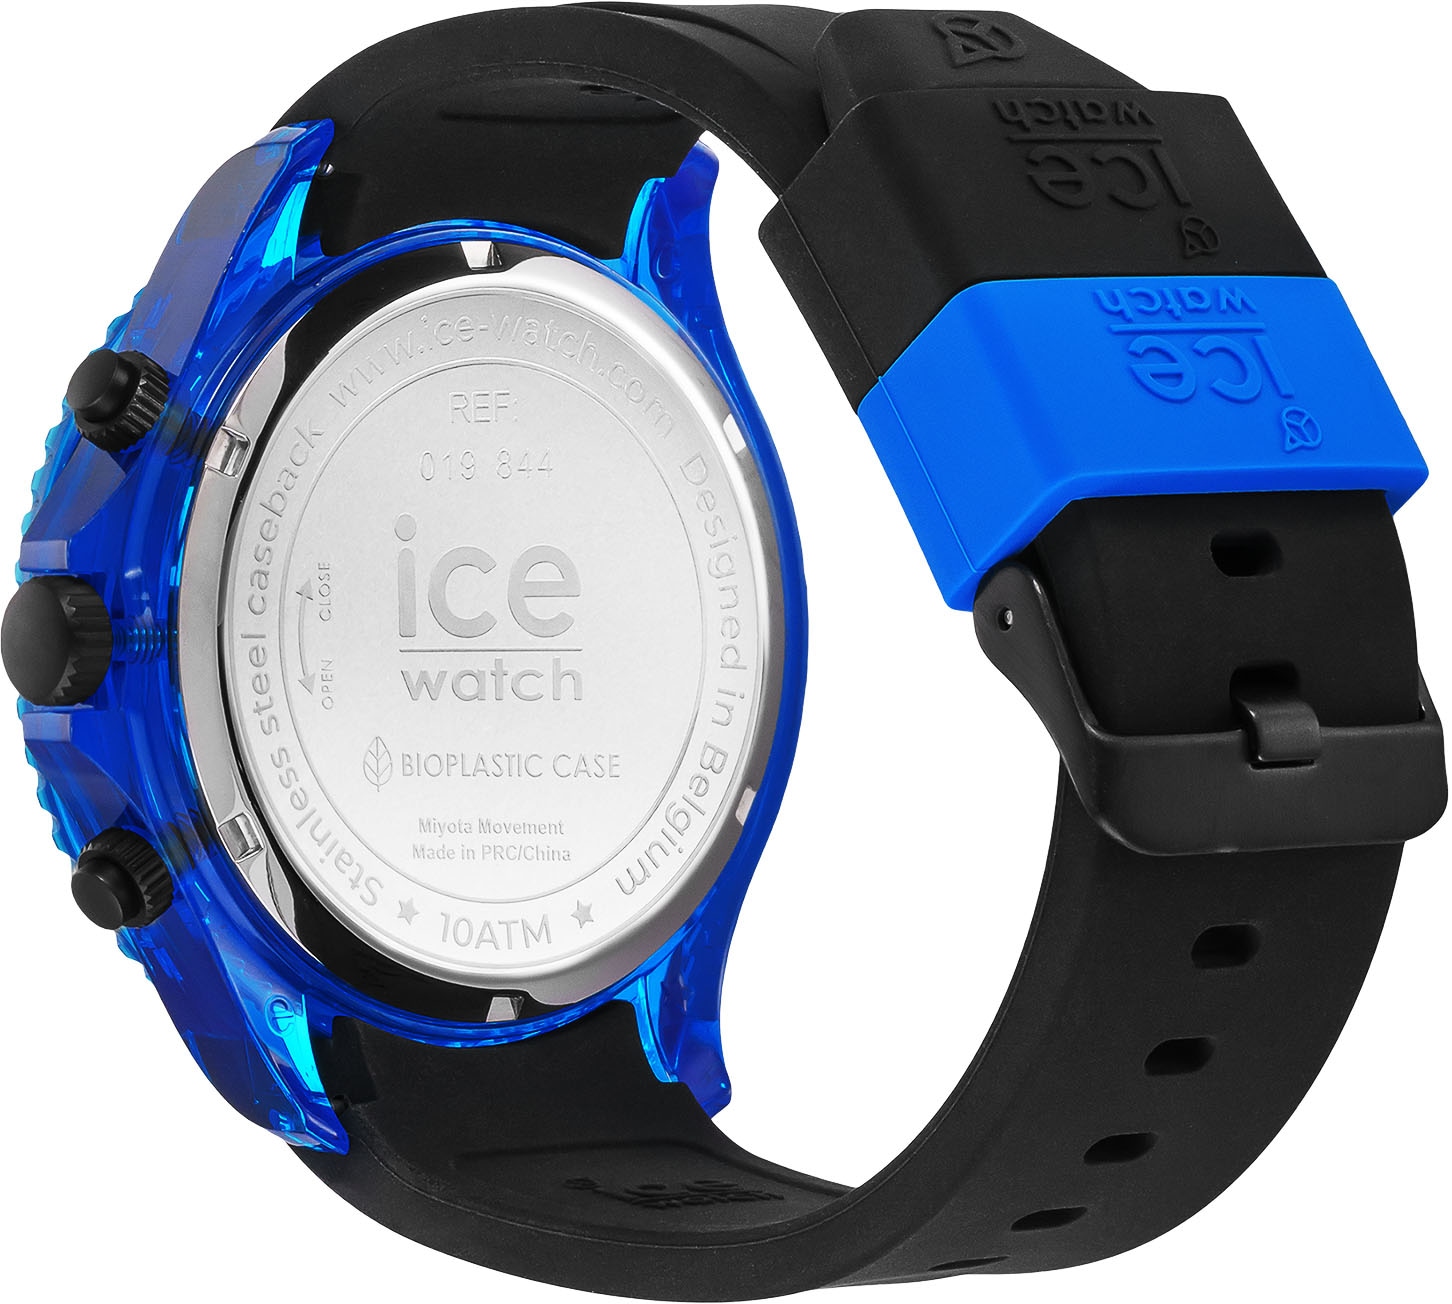 ice-watch Chronograph »ICE chrono - Black blue - Extra large - CH, 019844«  online shoppen bei OTTO